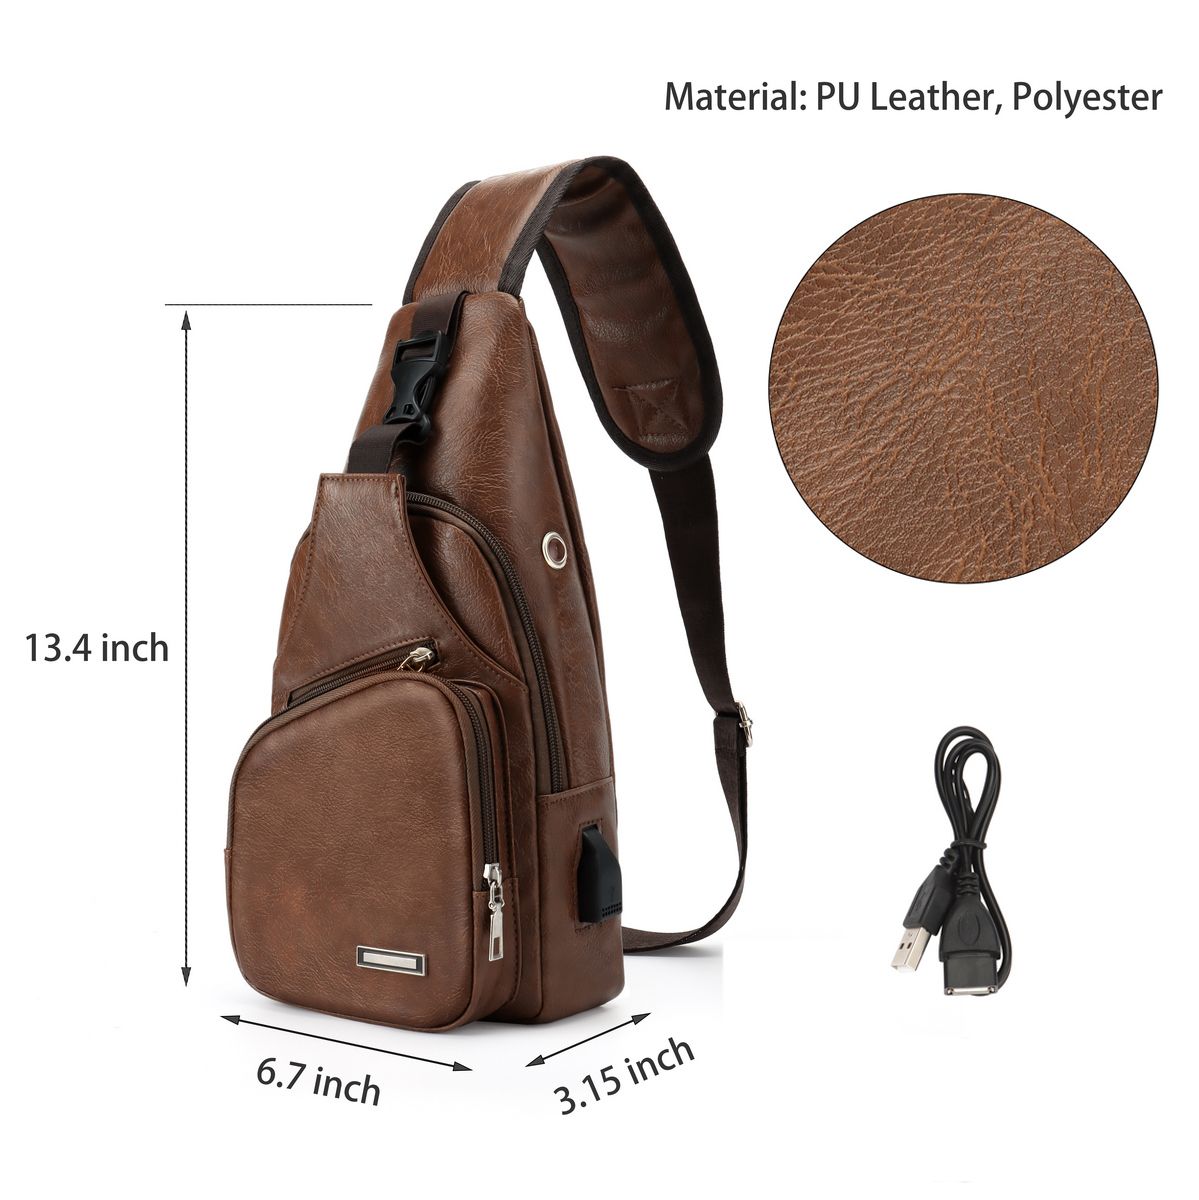 Spencer Men's Leather Sling Bag Anti Theft Chest Shoulder Bag Water Resistant Crossbody Backpack Unbalance Daypack with USB Charging Port for Travel Hiking (13.8" x 6.7" x 2.4",Dark Brown) - image 4 of 5